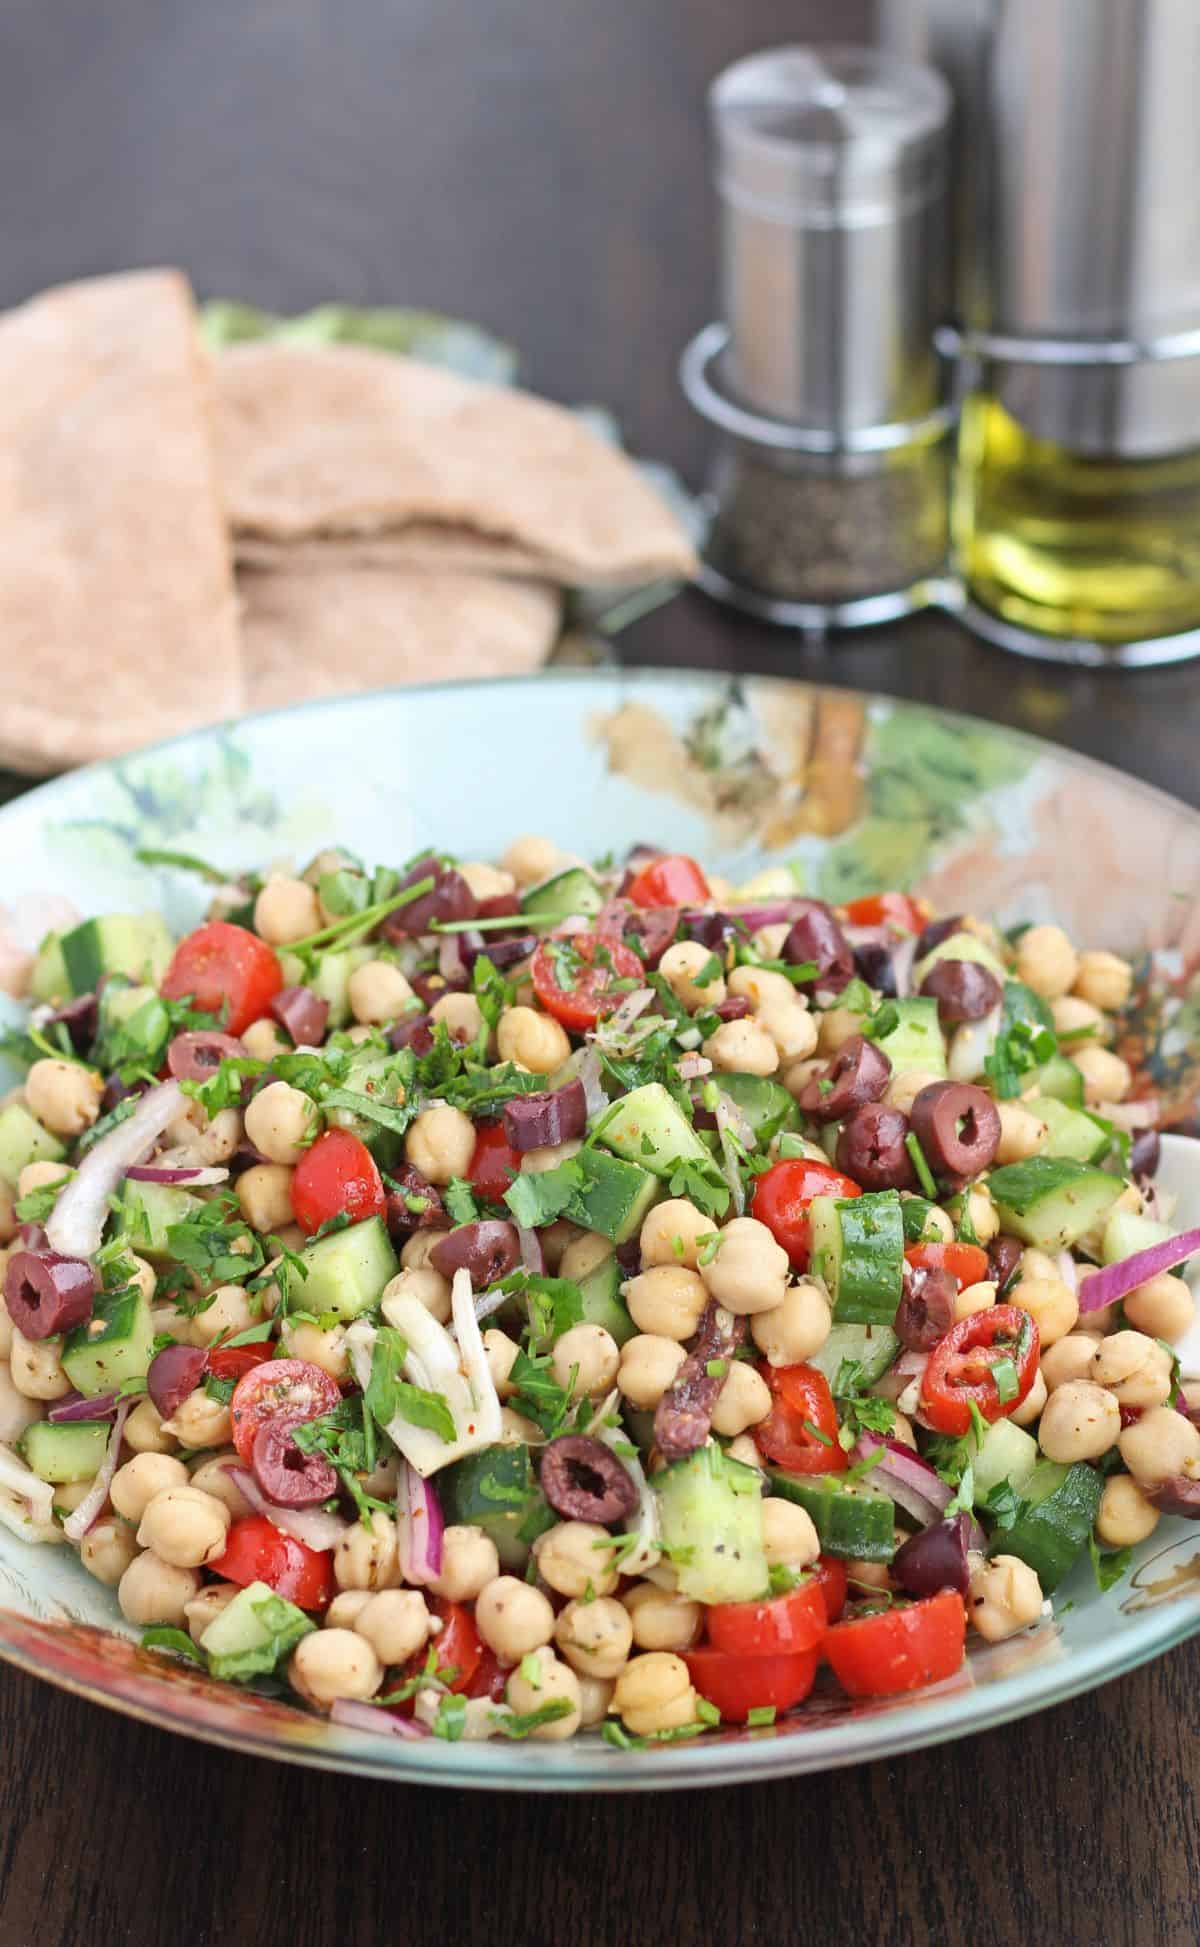 salad with chickpeas, tomato, olive, cucumber and greens